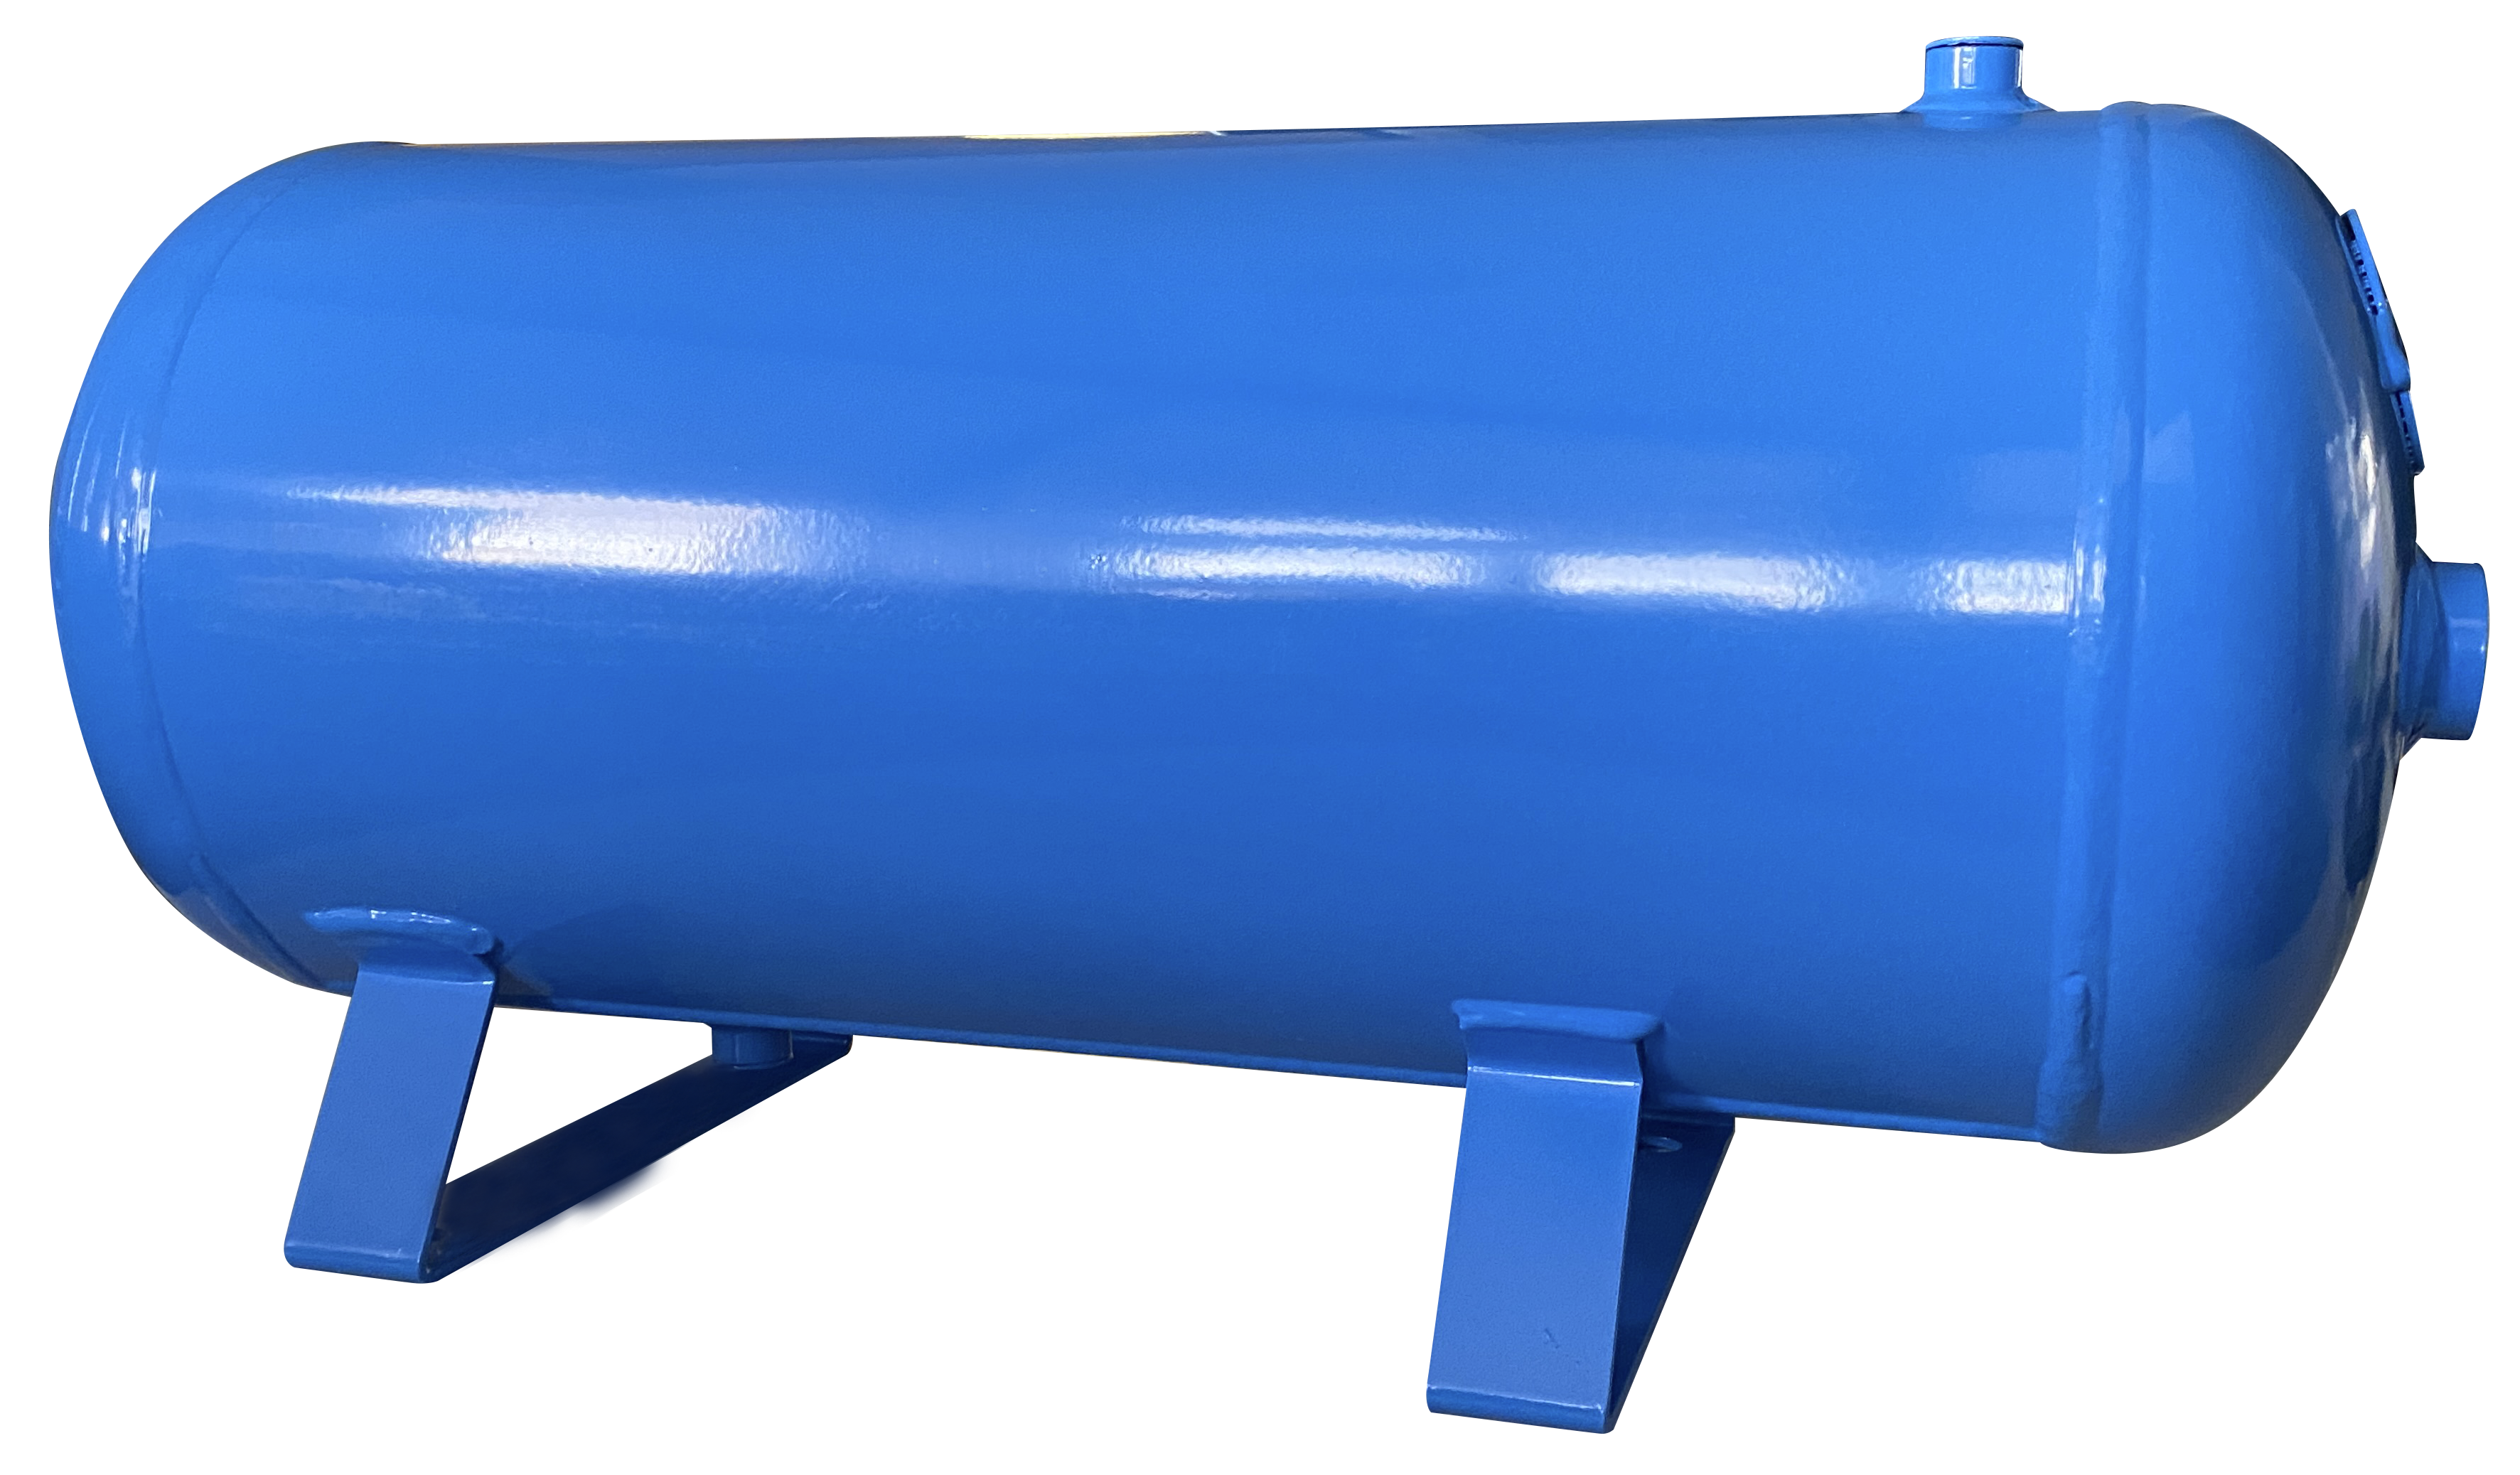 Epoxy painted steel compressed air tanks with feet